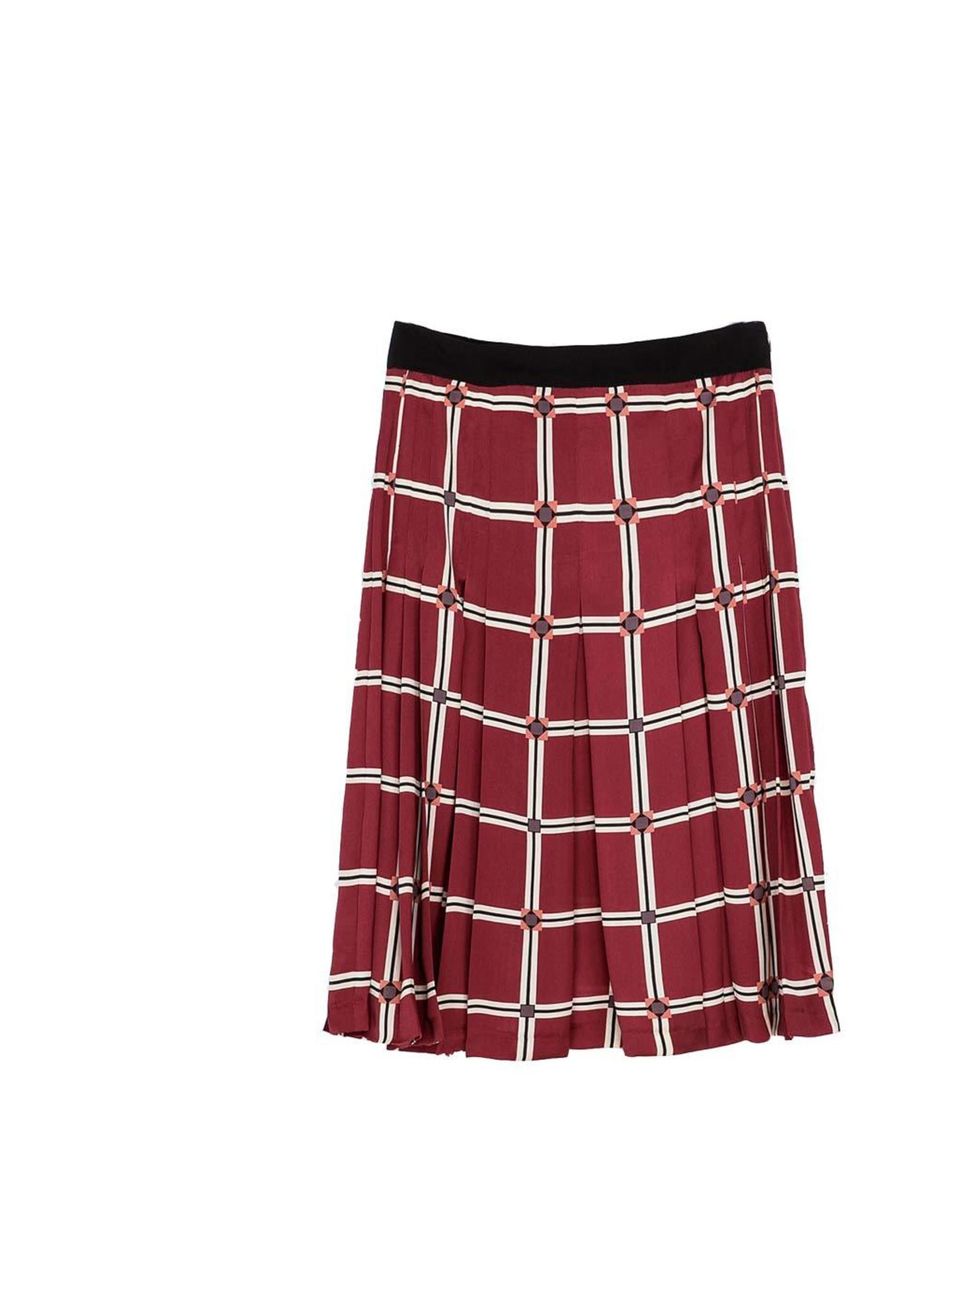 <p>I love the print of this skirt - it will look great with a chunky jumper in winter.</p><p>- Collette Lyons, Acting Content Director</p><p><a href="http://www.zara.com/uk/en/woman/skirts/check-print-skirt-c269188p1296448.html">Zara</a> skirt, £59.99</p>